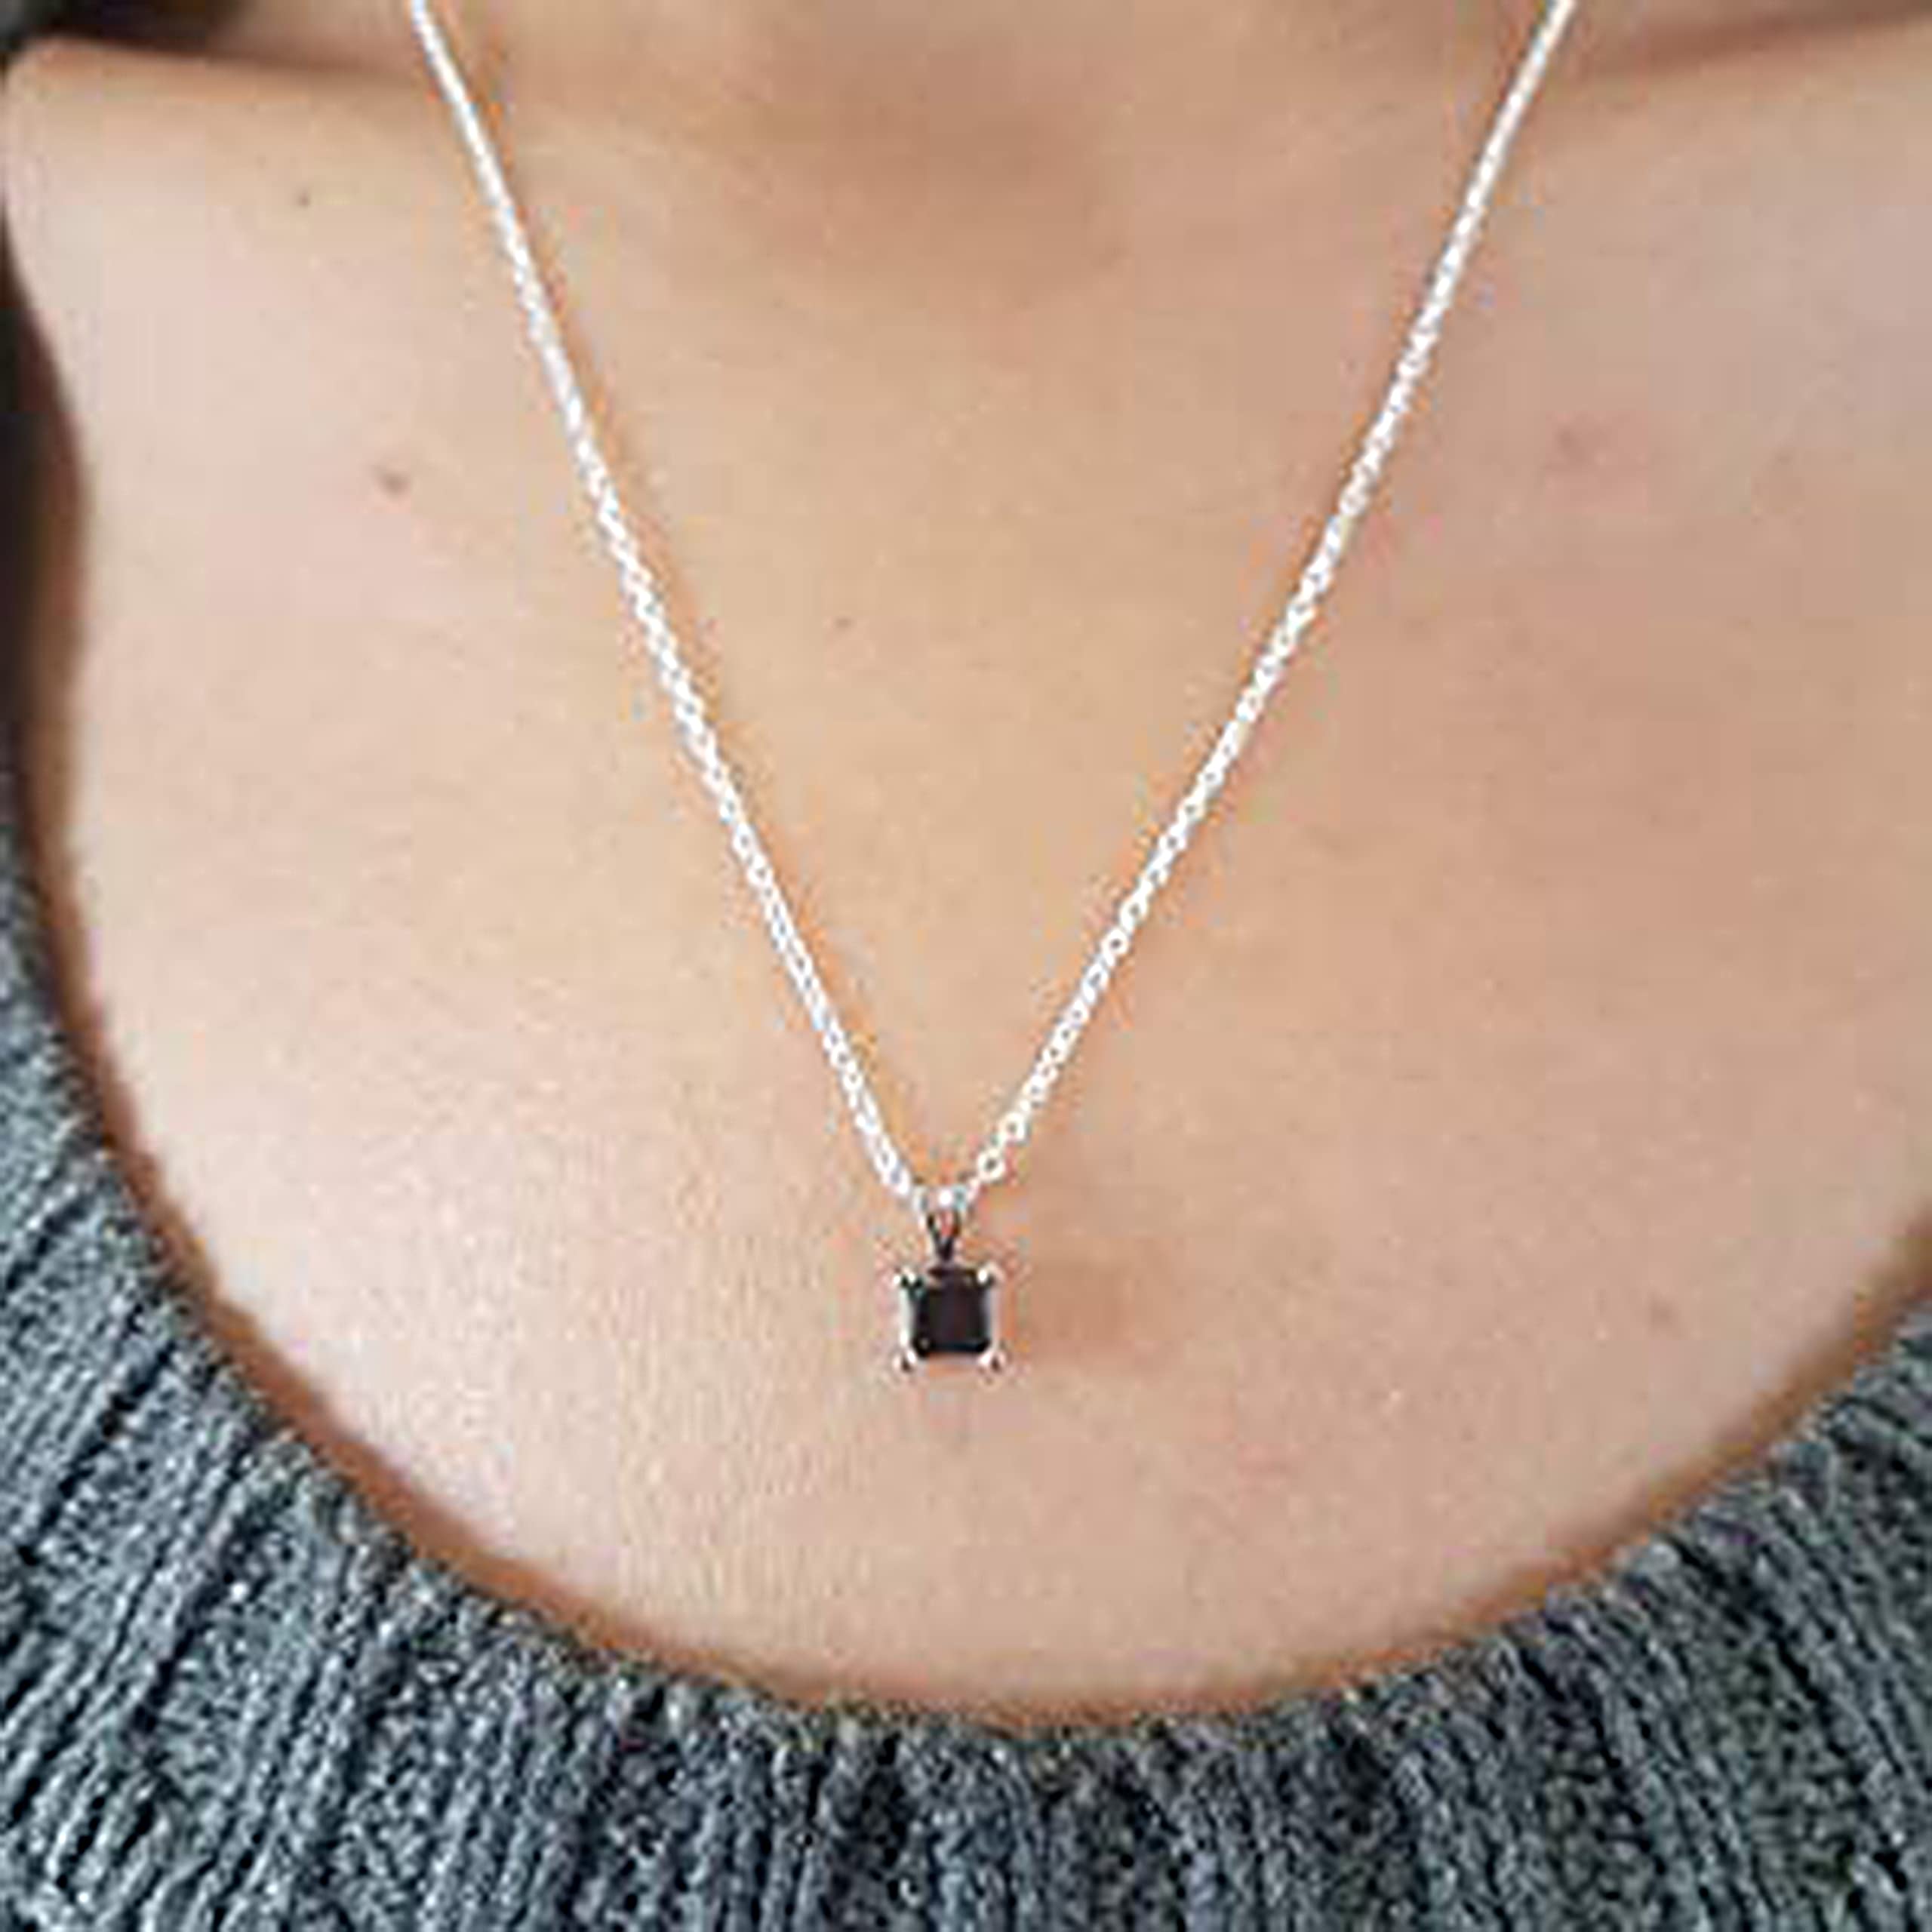 Dazzlingrock Collection Princess Black Diamond Solitaire from 1/4 Carat to 1 Carat Pendant With 18 Inch Silver Chain, 14K Gold